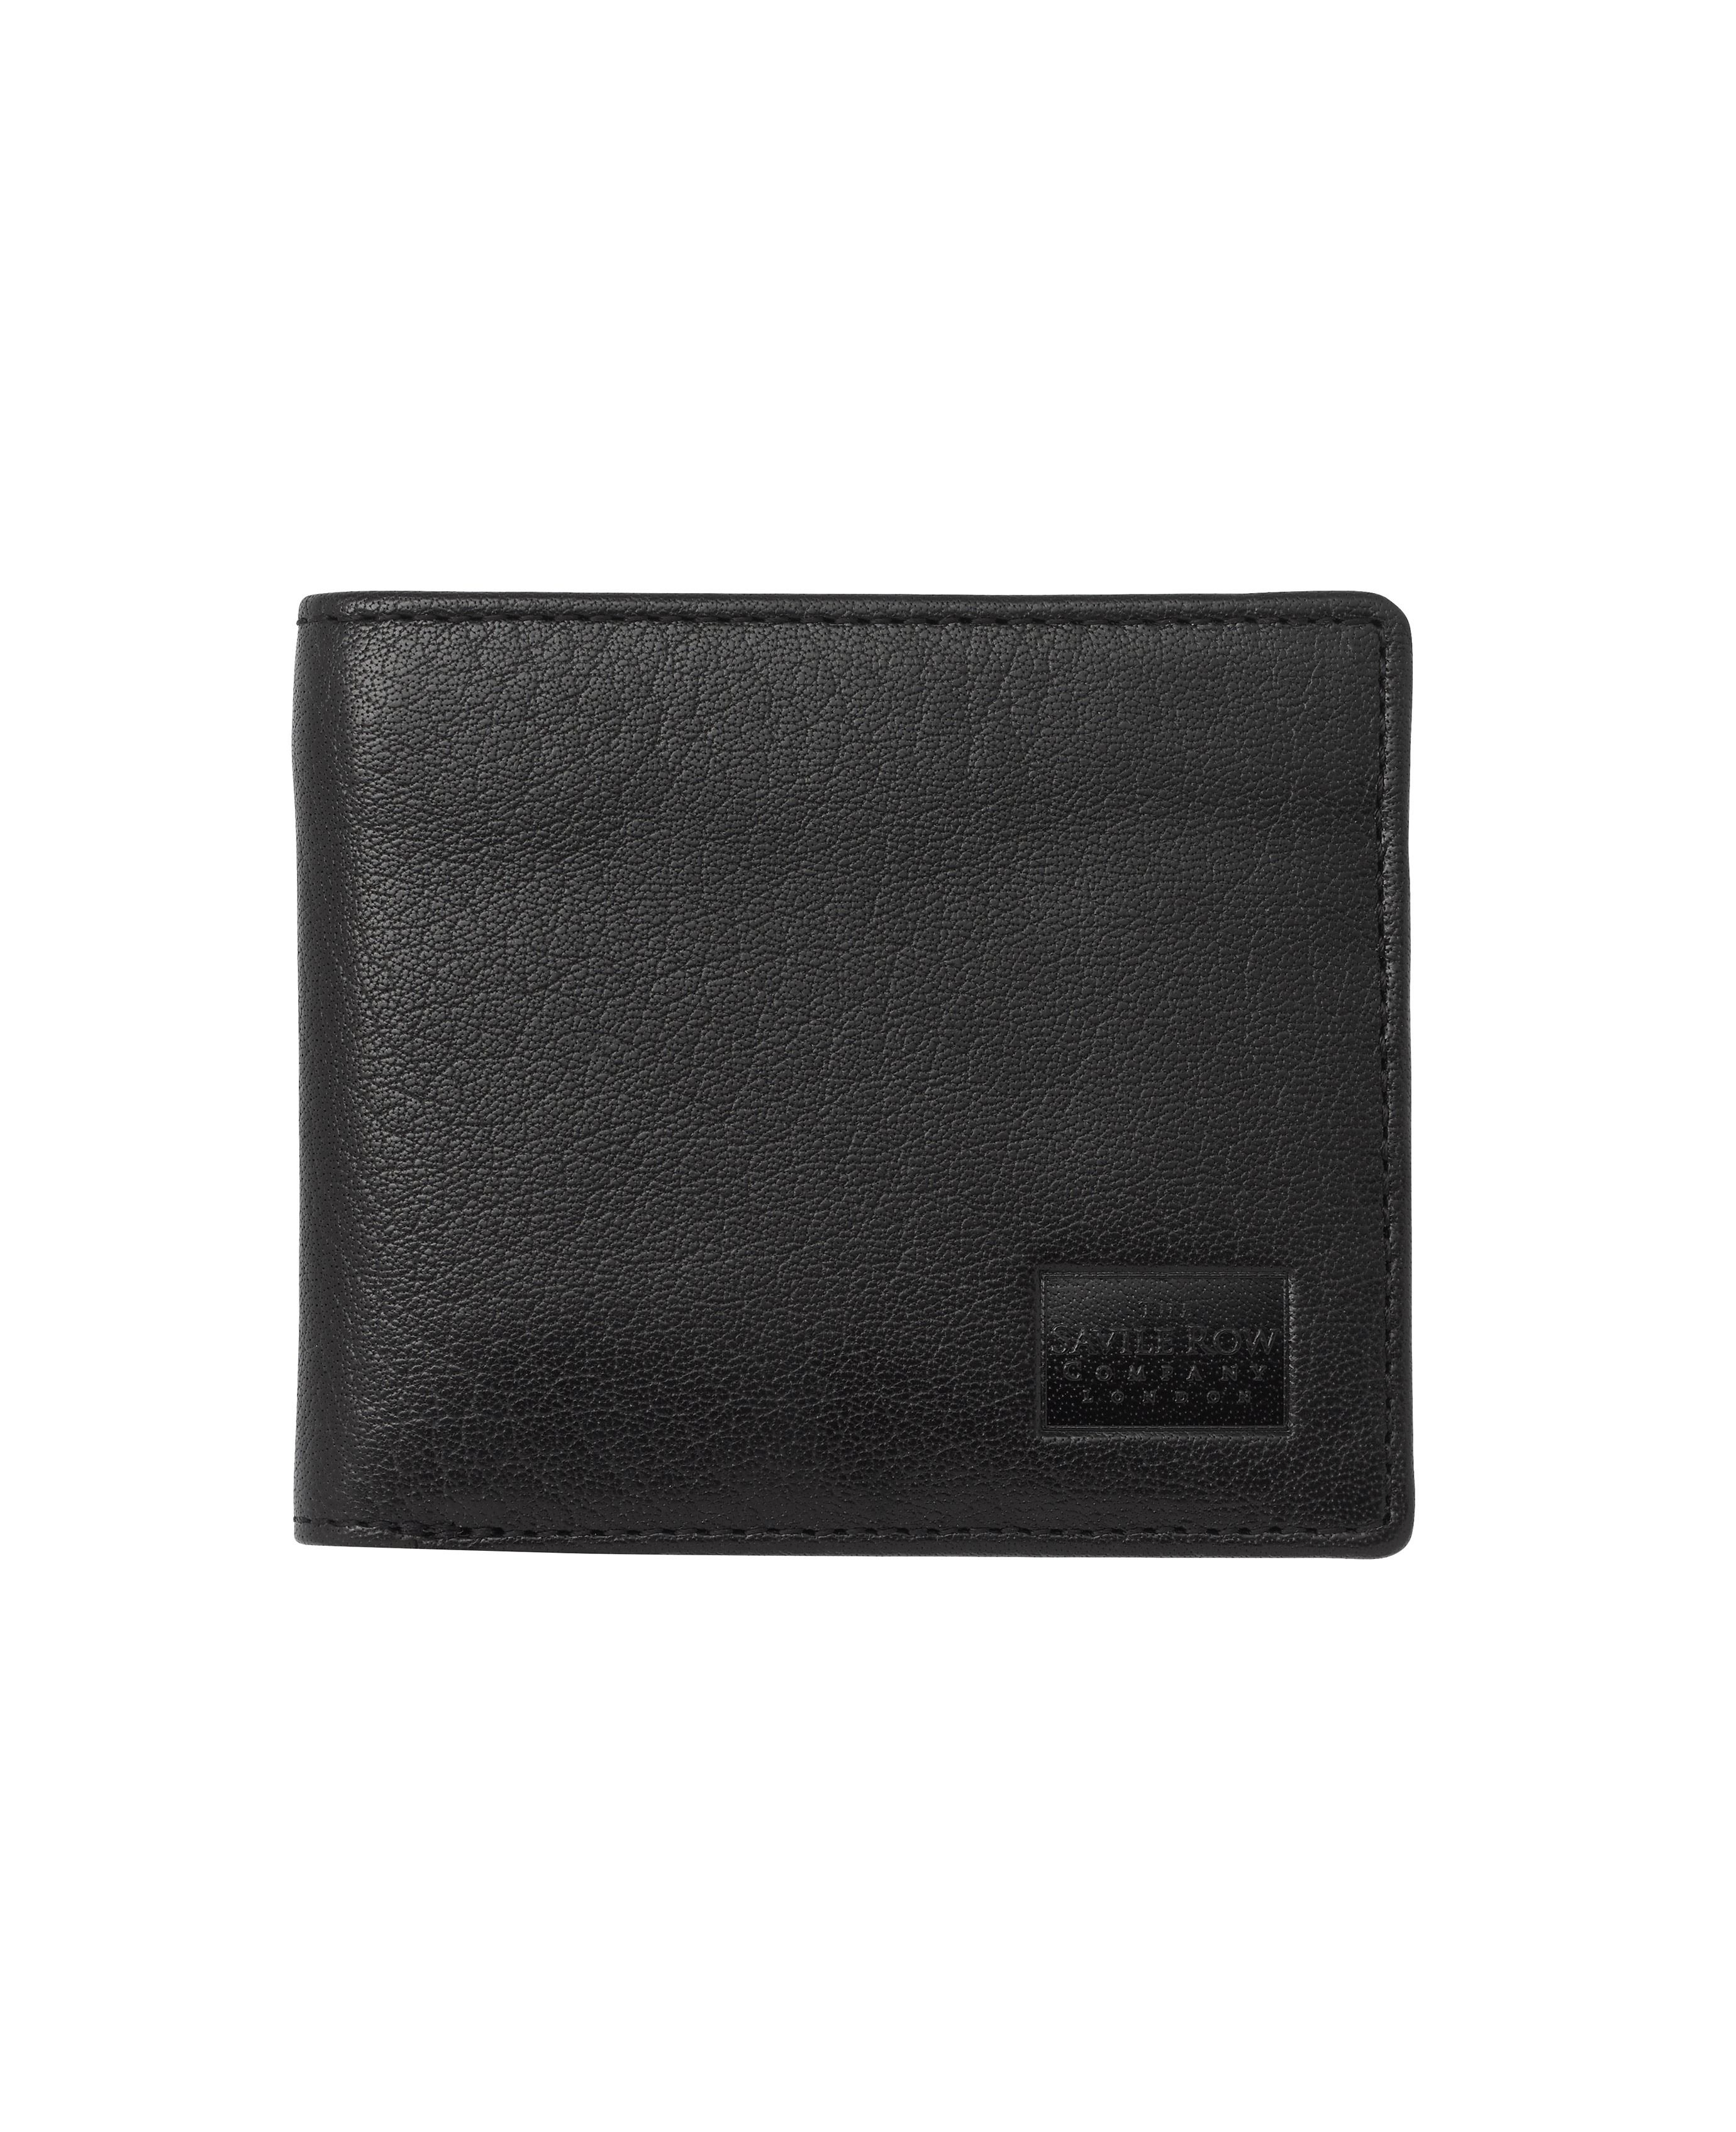 Mens Black Leather Classic Billfold Wallet Company. | Savile Row Co